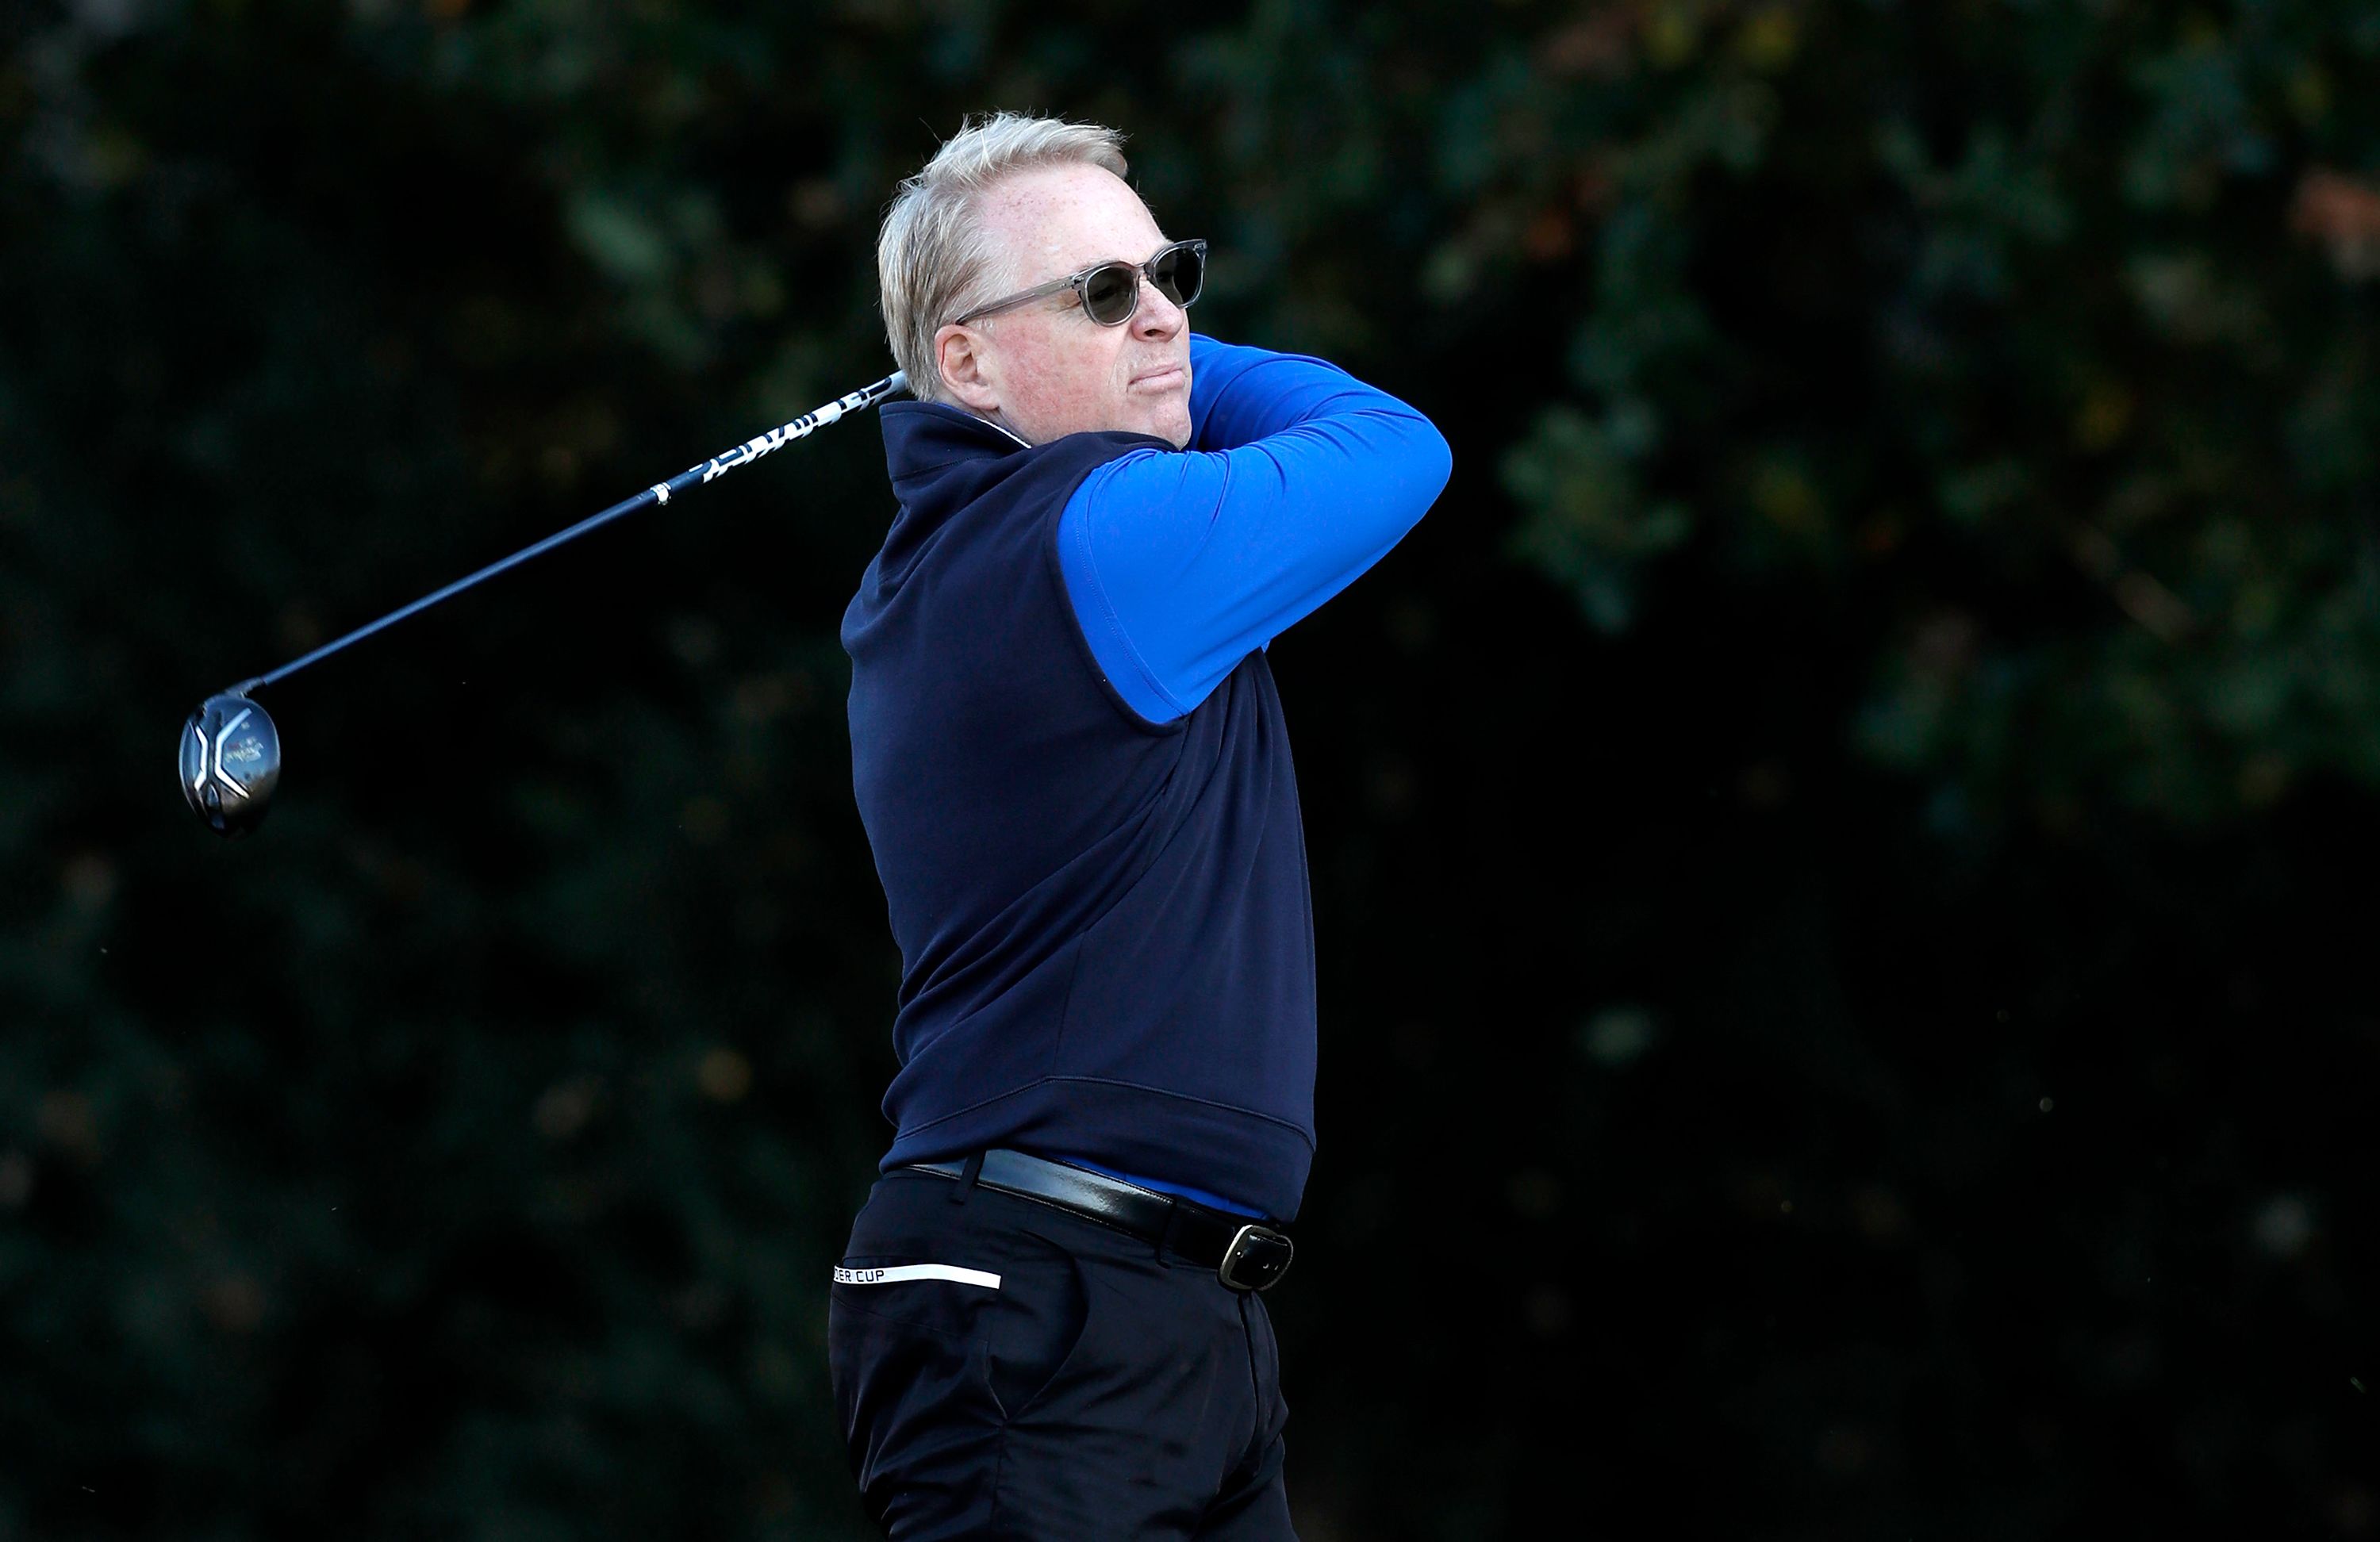 Perth World Super 6: Fireworks, DJs on the tee: Is Keith Pelley's GolfSixes  the future of golf?